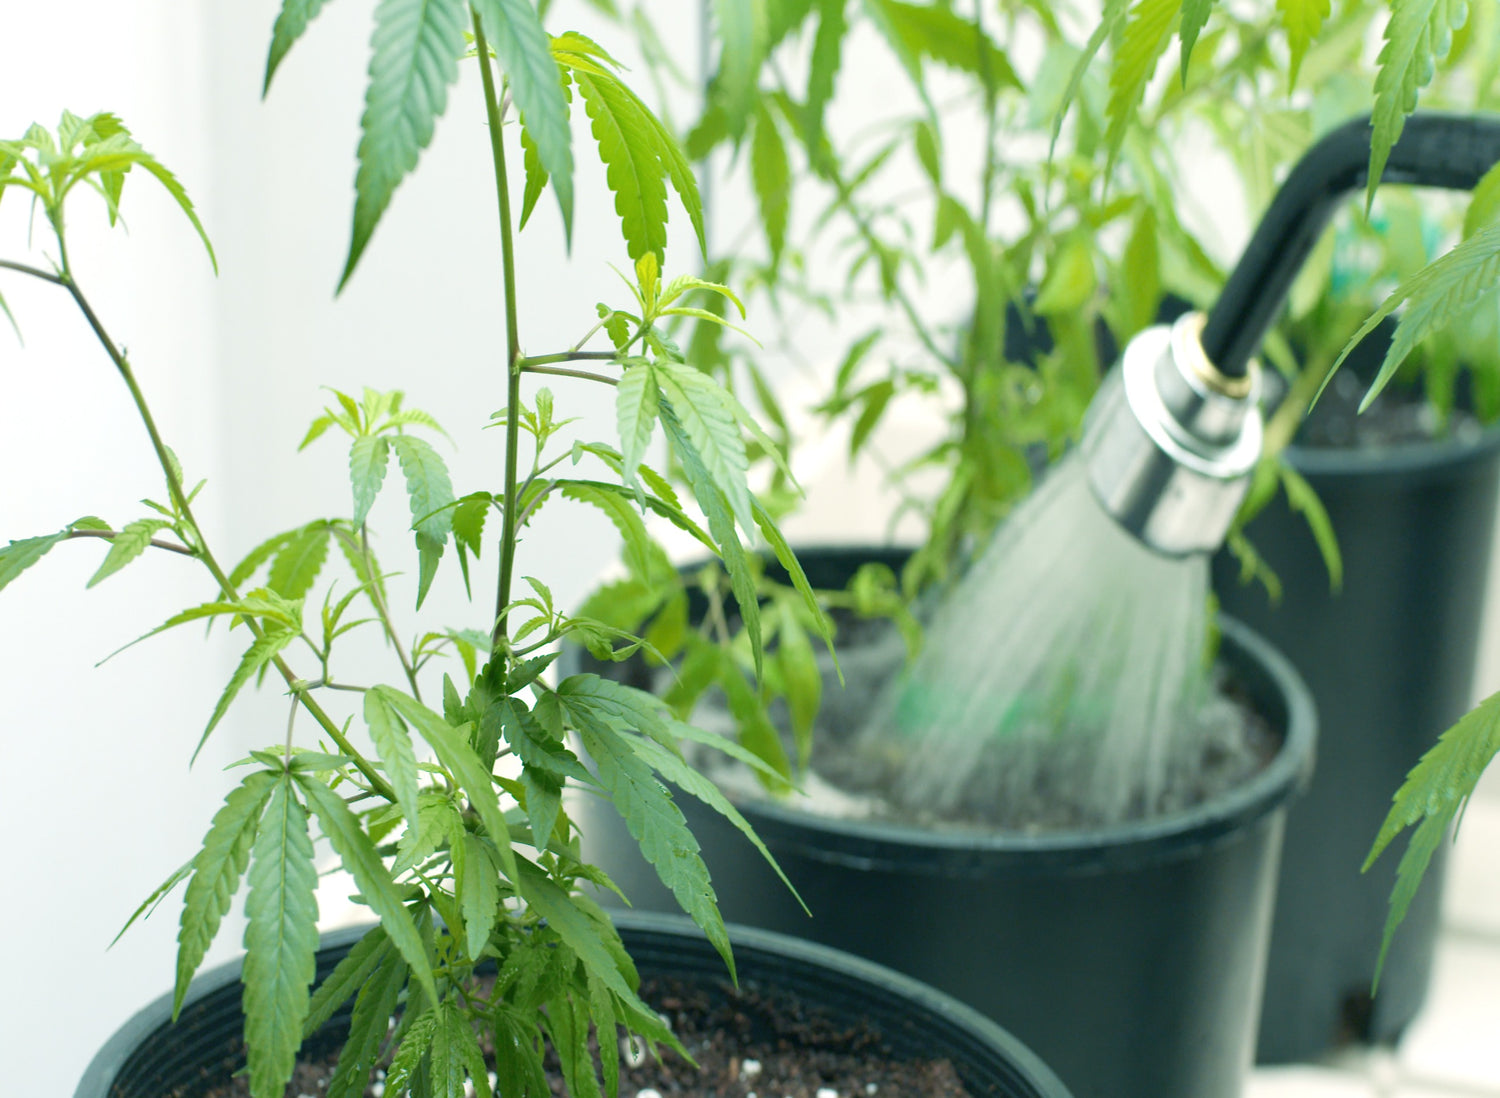 Flushing Cannabis Plants: When and How?